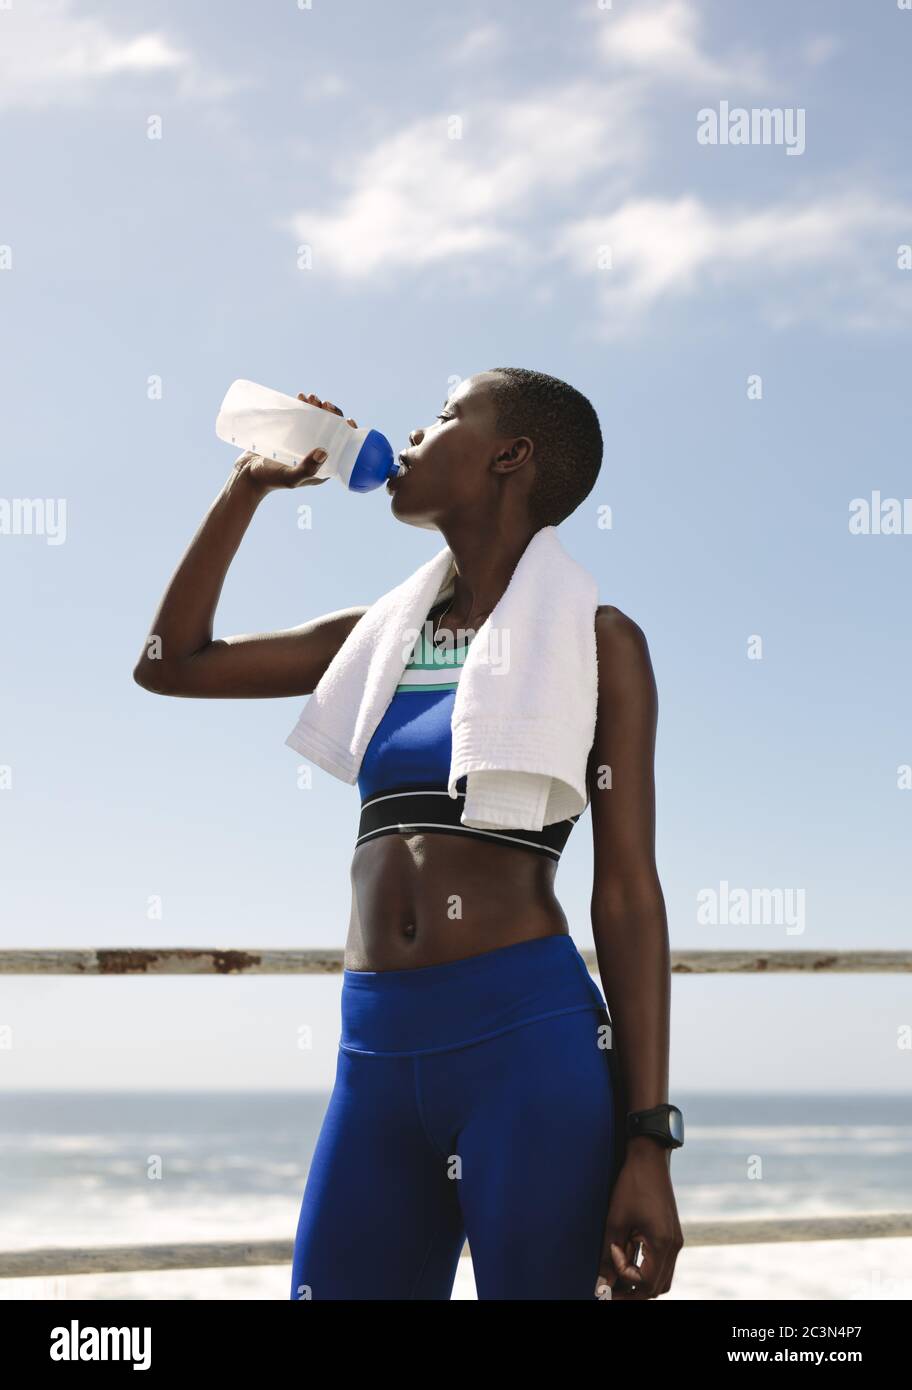 https://c8.alamy.com/comp/2C3N4P7/fit-woman-drinking-water-after-workout-session-thirsty-female-athlete-drinking-water-outdoors-on-the-road-by-the-sea-2C3N4P7.jpg